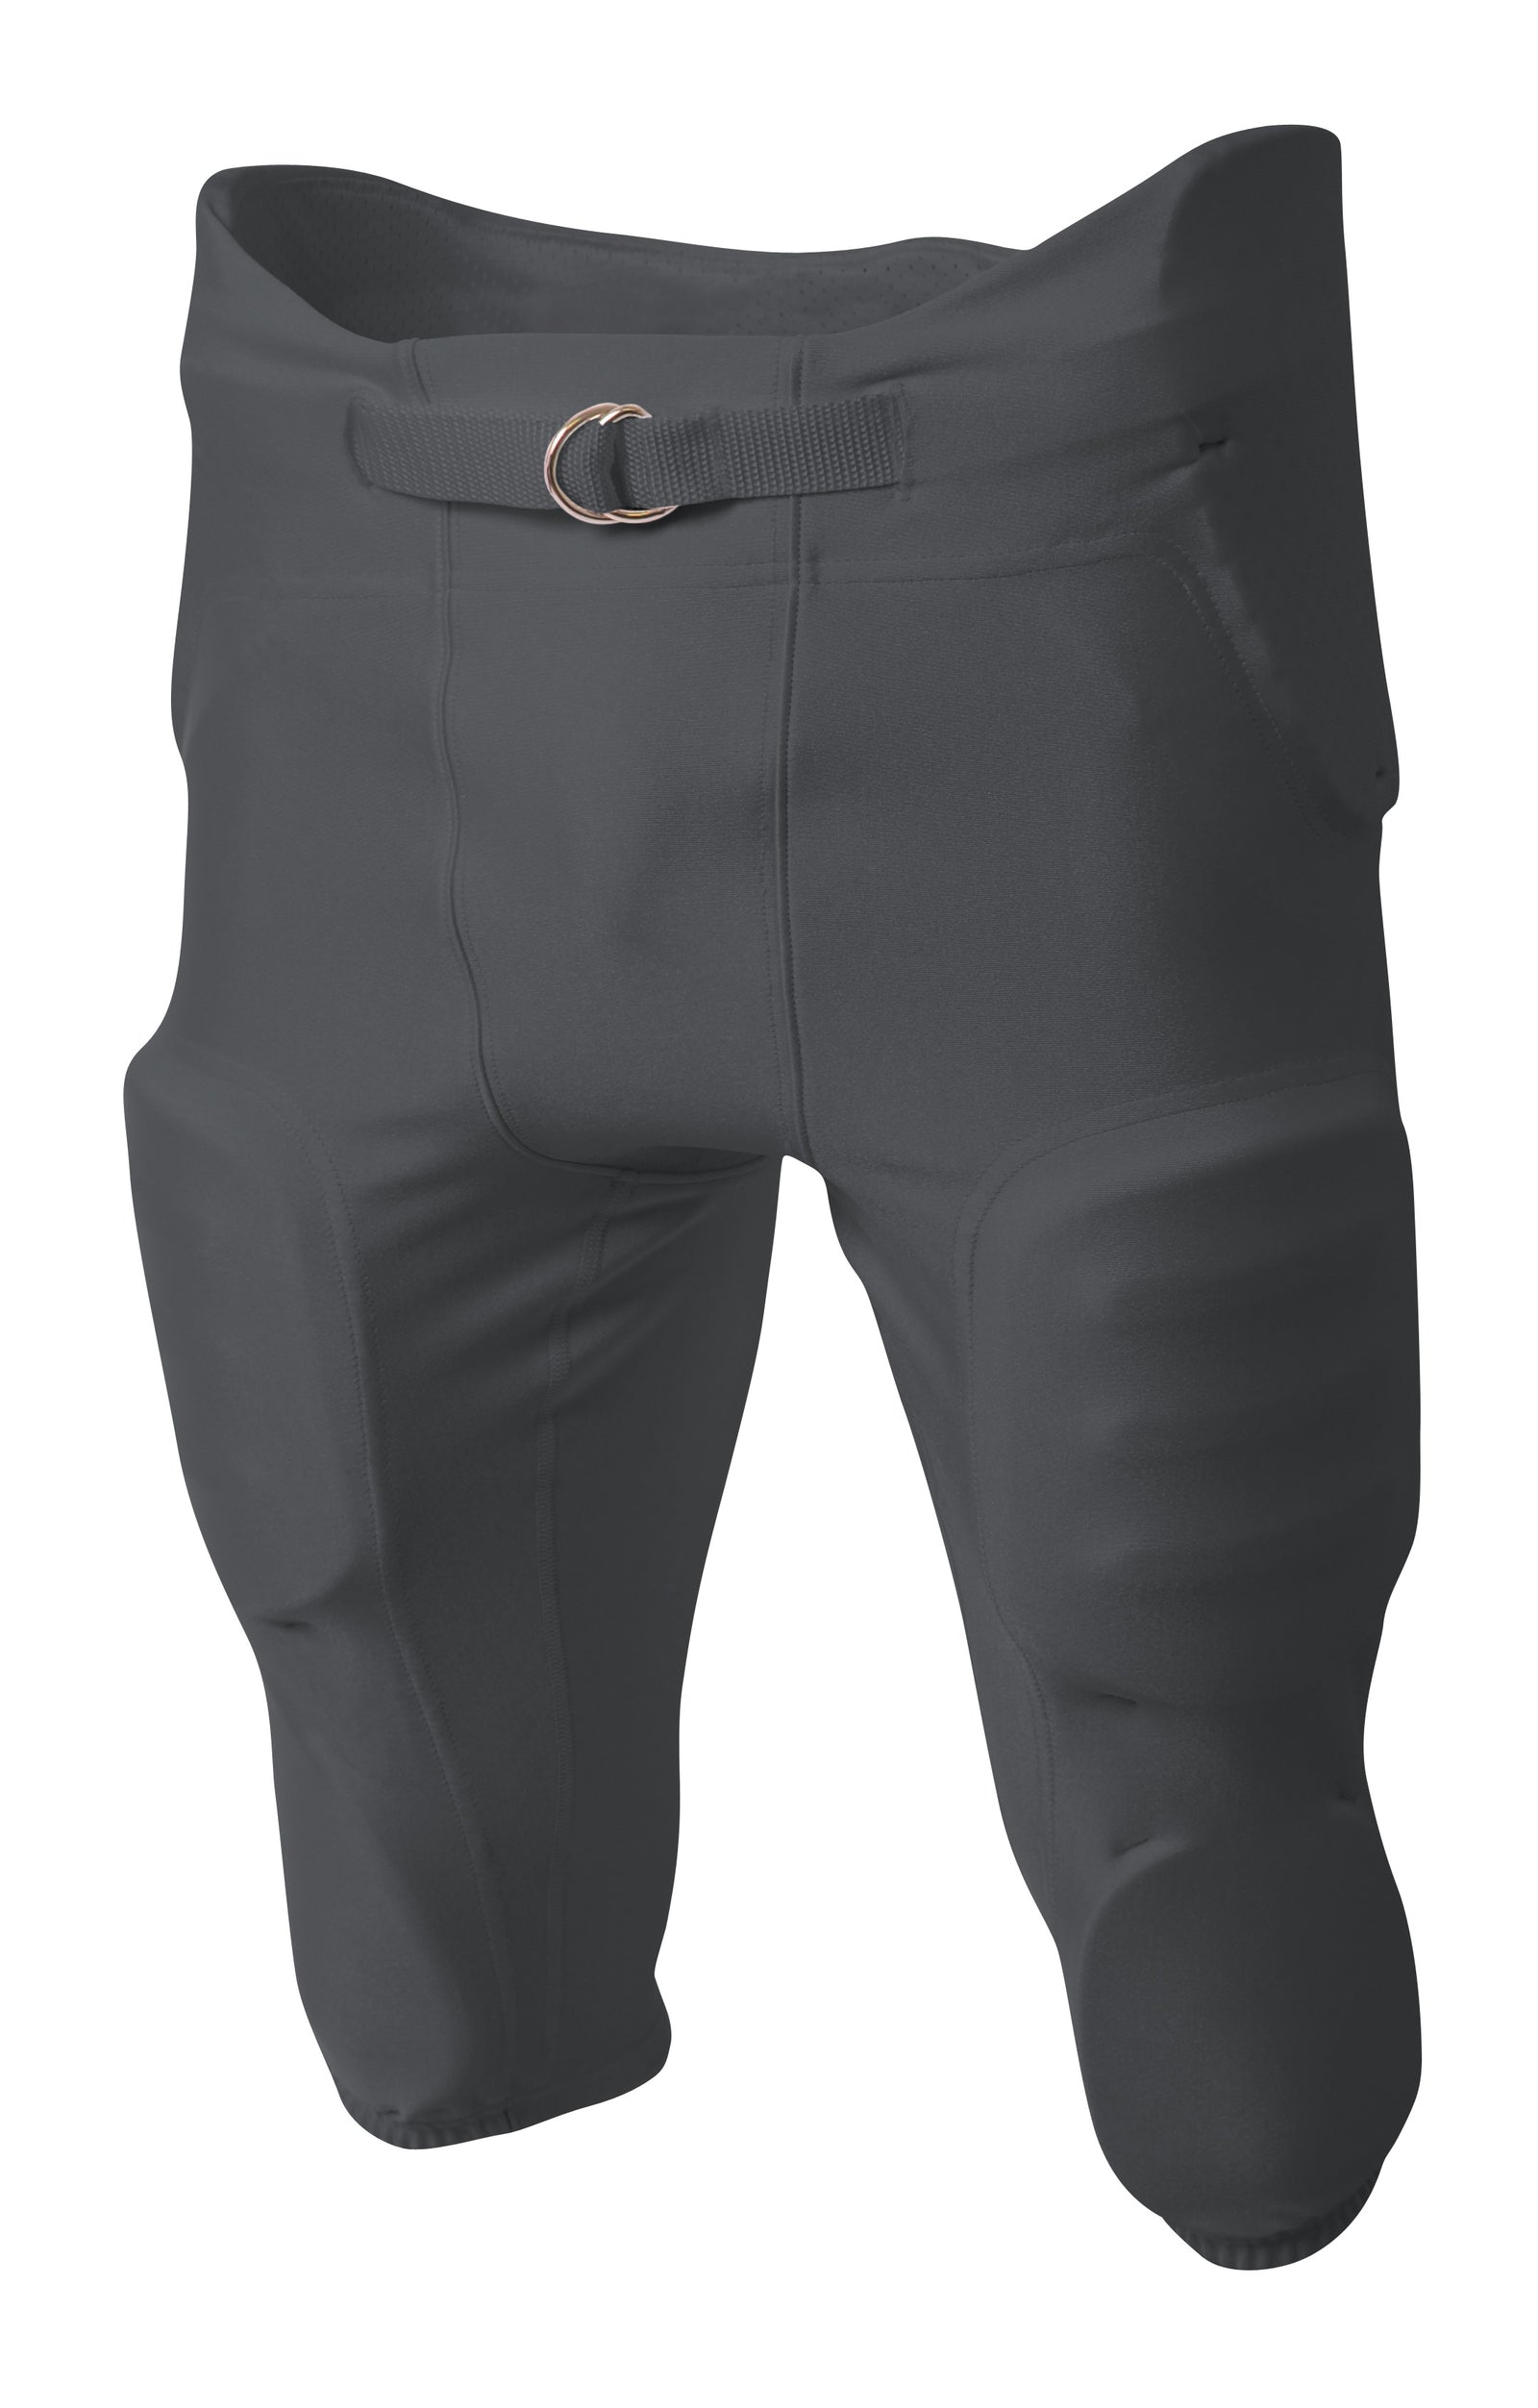 GRAPHITE A4 Integrated Zone Football Pant